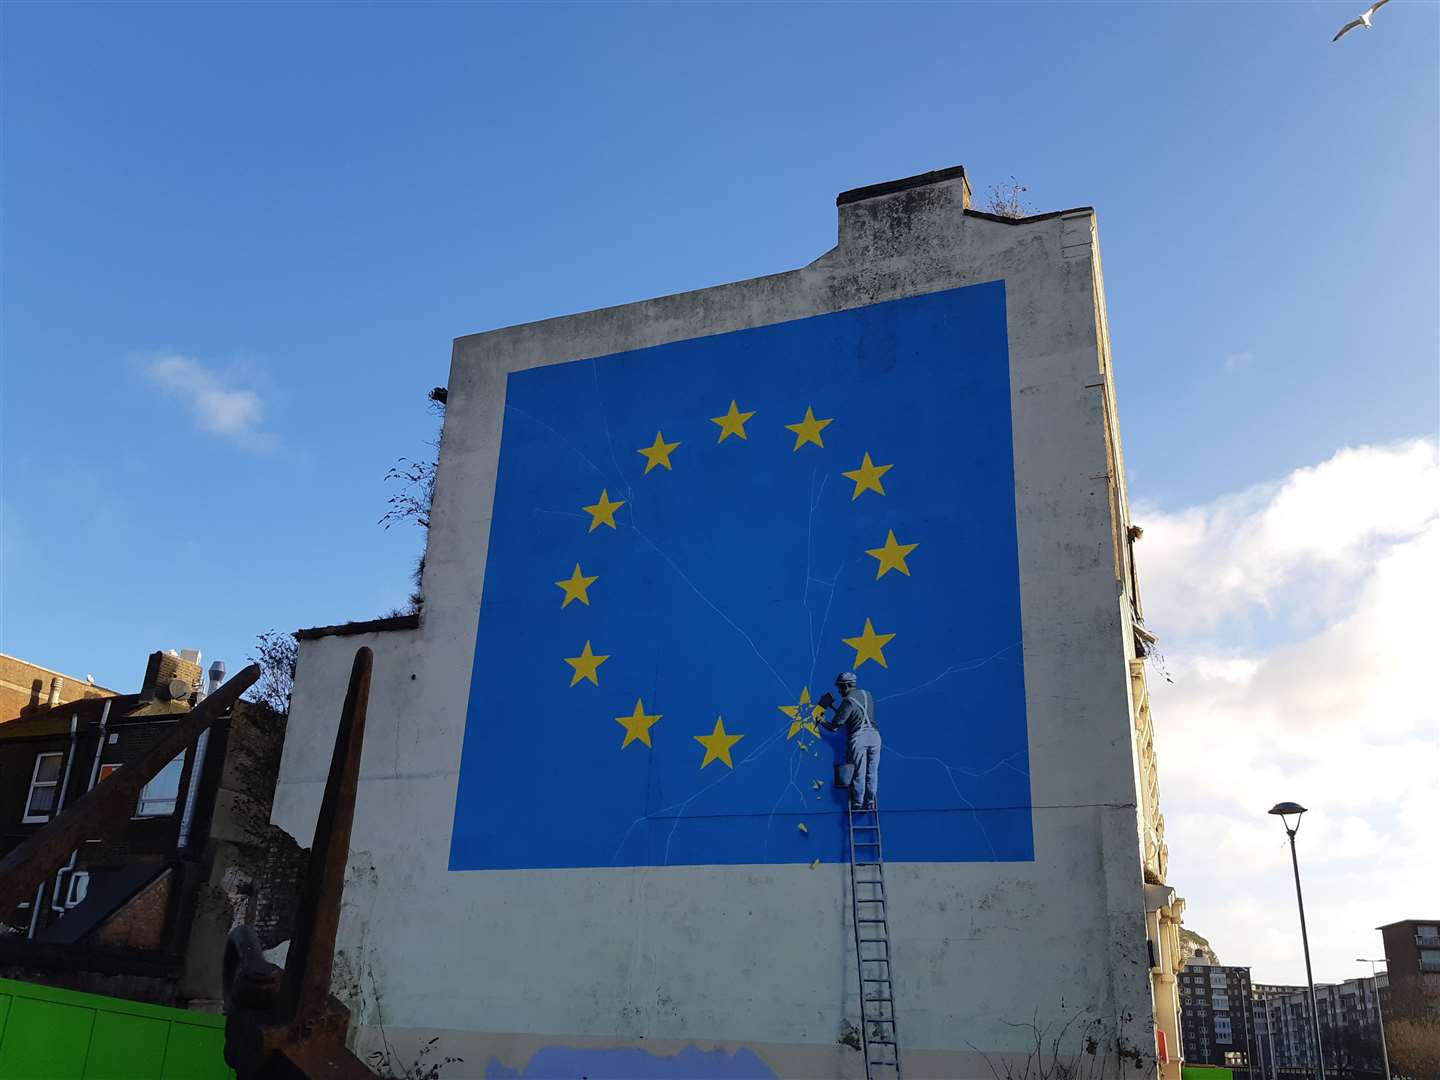 The mural as it was put up in 2017